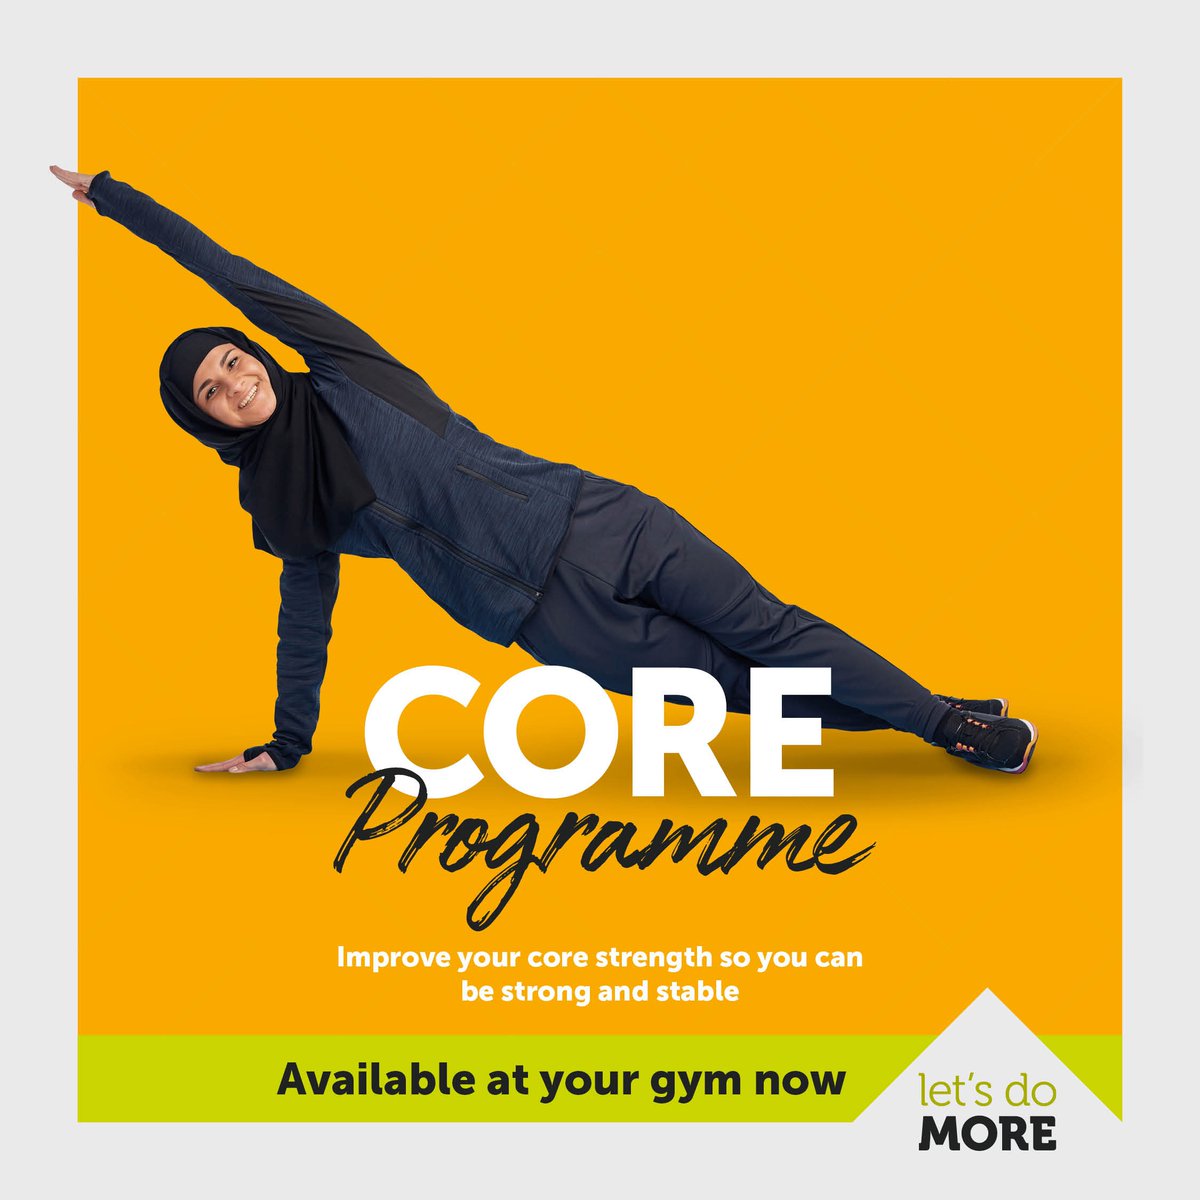 Our 12-week CORE plan is designed to help create a strong and stable core, which will reduce back pain and improve your day-to-day performance. Available to any new & current members find out more: bishamabbeynsc.co.uk/nsc/facilities…